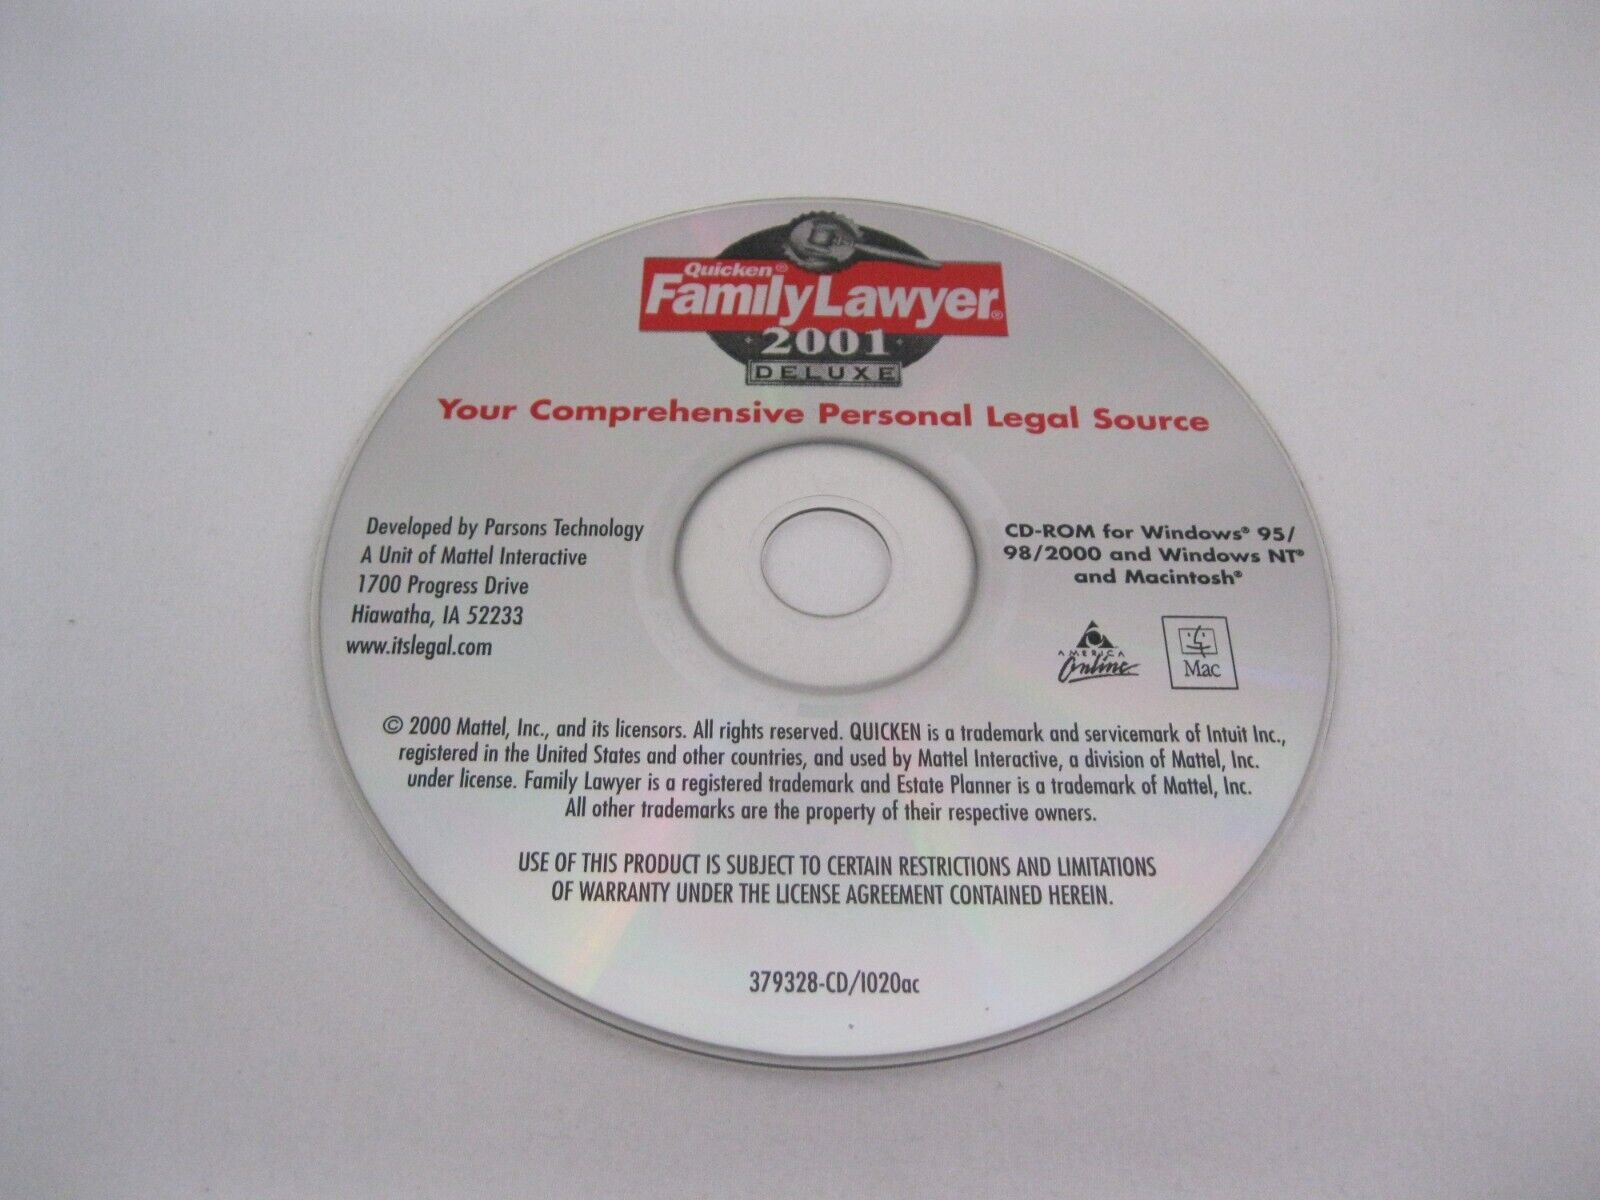 Quicken Family Lawyer 2001 Deluxe CD-ROM Windows 95/98-2000 Mattel Legal Source